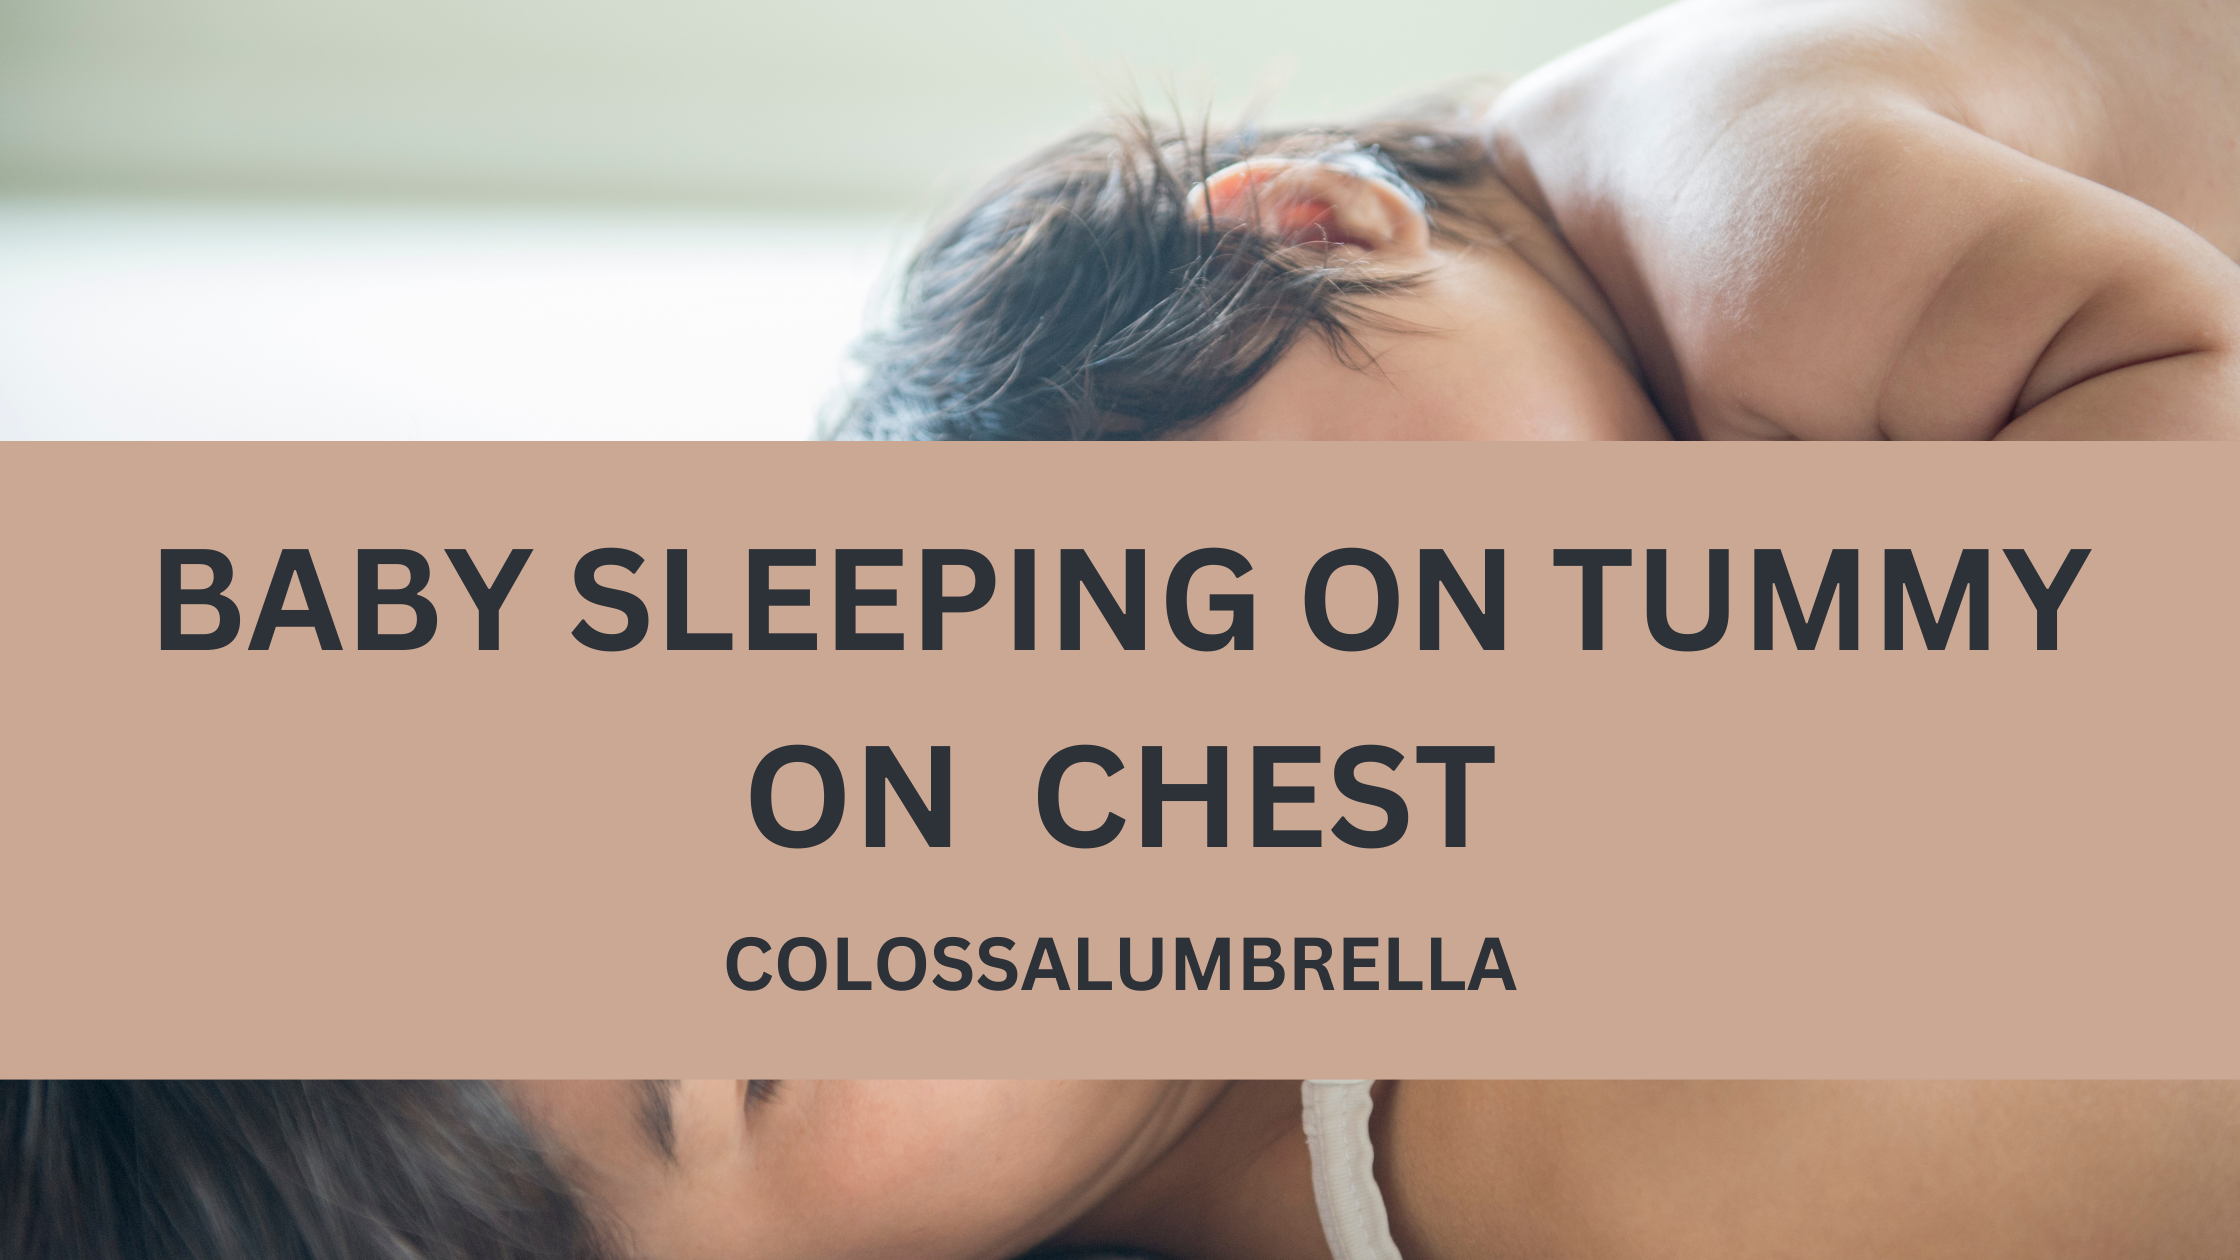 10 Benefits of Baby sleeping on tummy on my chest